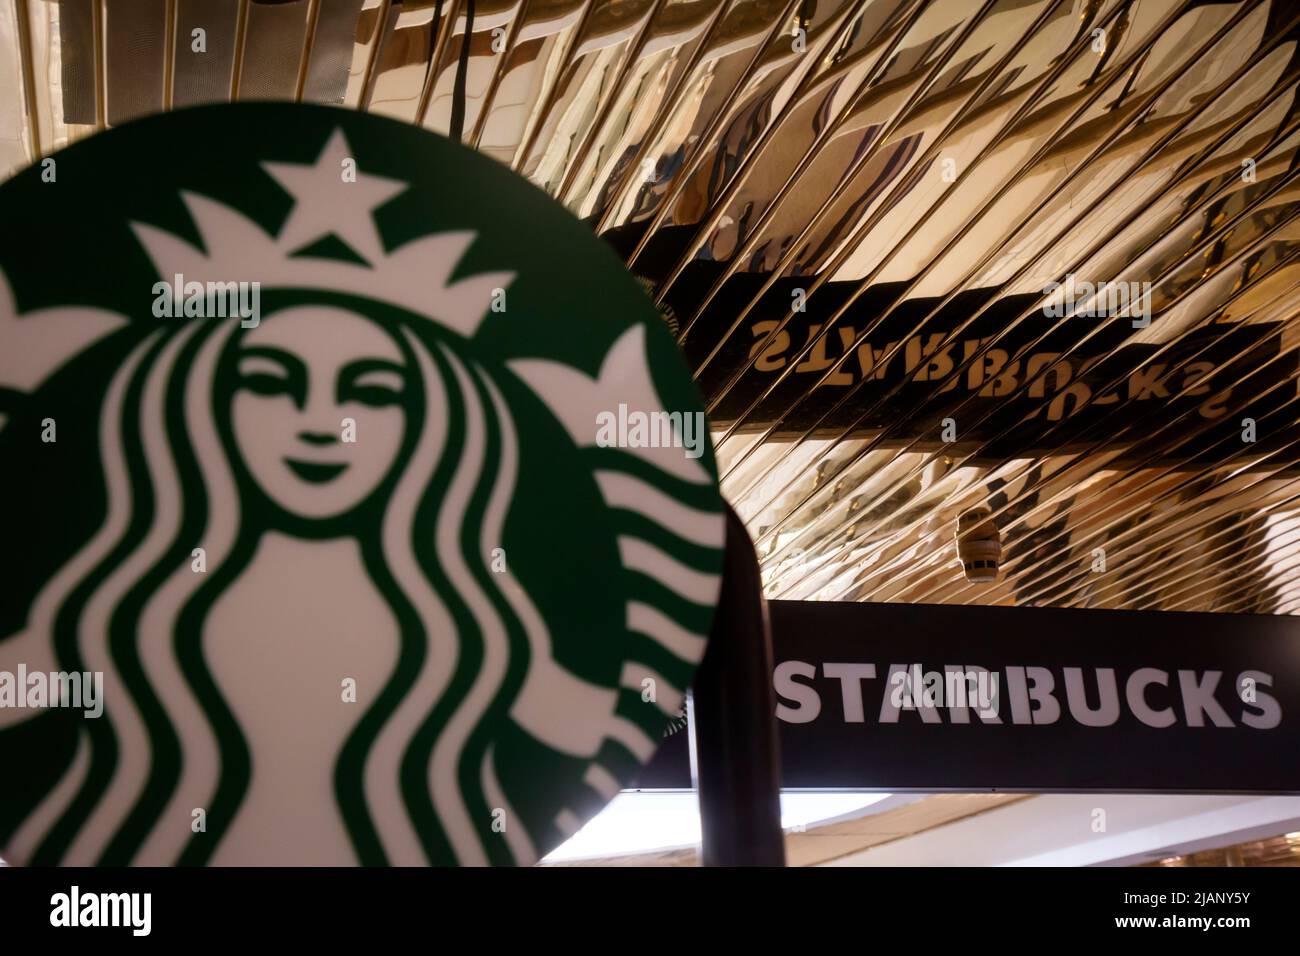 Advertising of the Starbucks coffee chain in a shopping mall Stock Photo